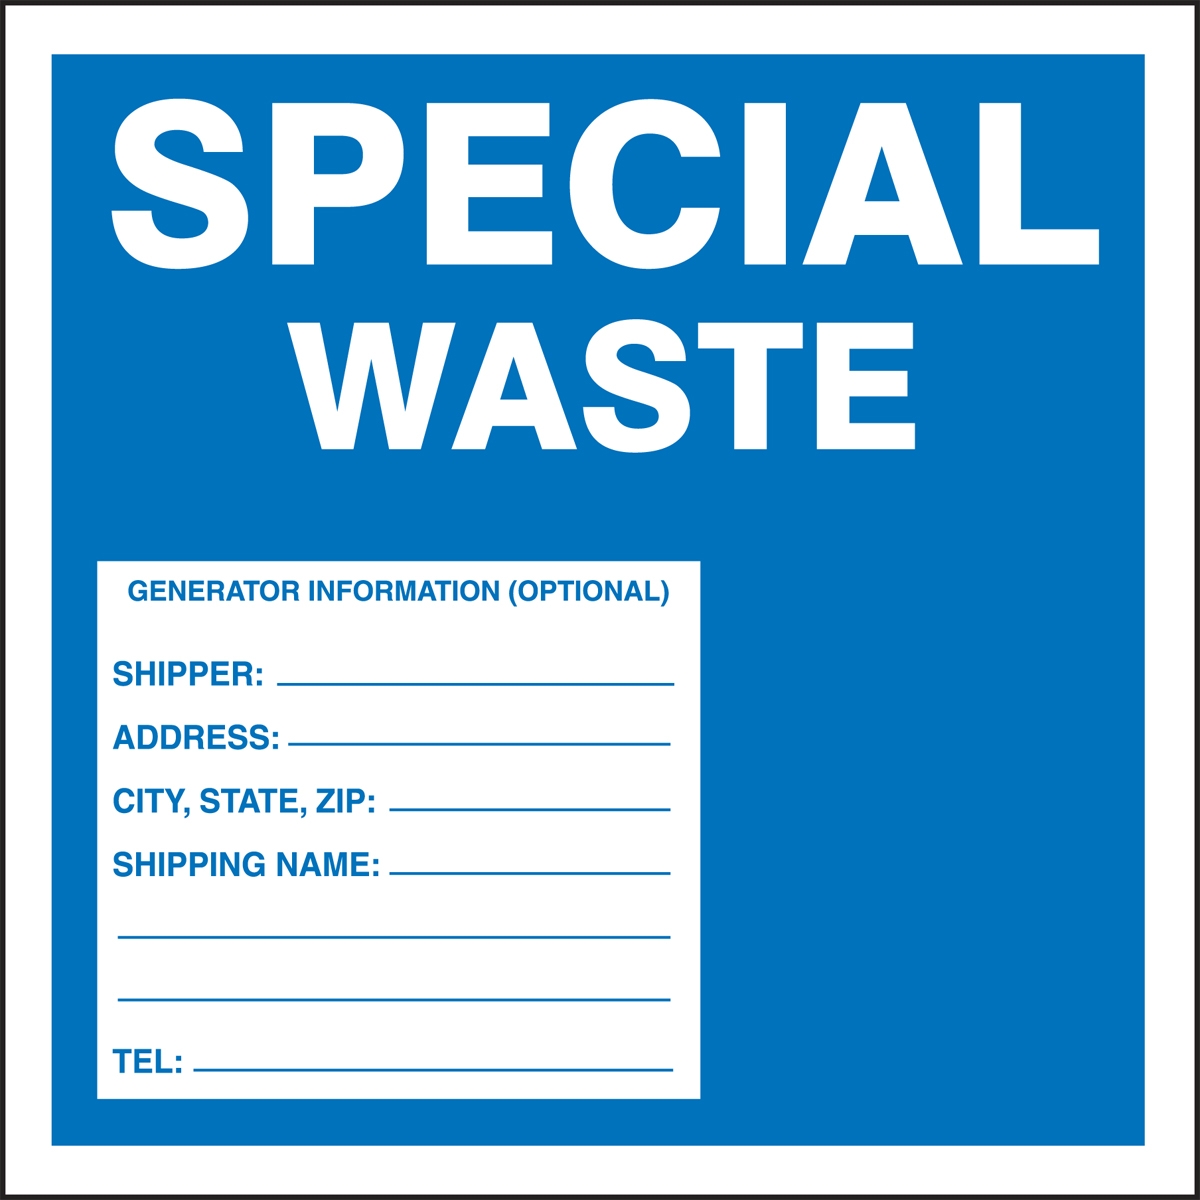 ENVIRONMENTAL PROTECTION AGENCY Blue/White Legend NON-REGULATED WASTE THIS WASTE IS NOT REGULATED BY THE U.S Accuform MHZW14EVC Adhesive-Poly Vinyl Hazardous Waste Label 6 Length x 6 Width x 2.6 mil Thickness Pack of 100 